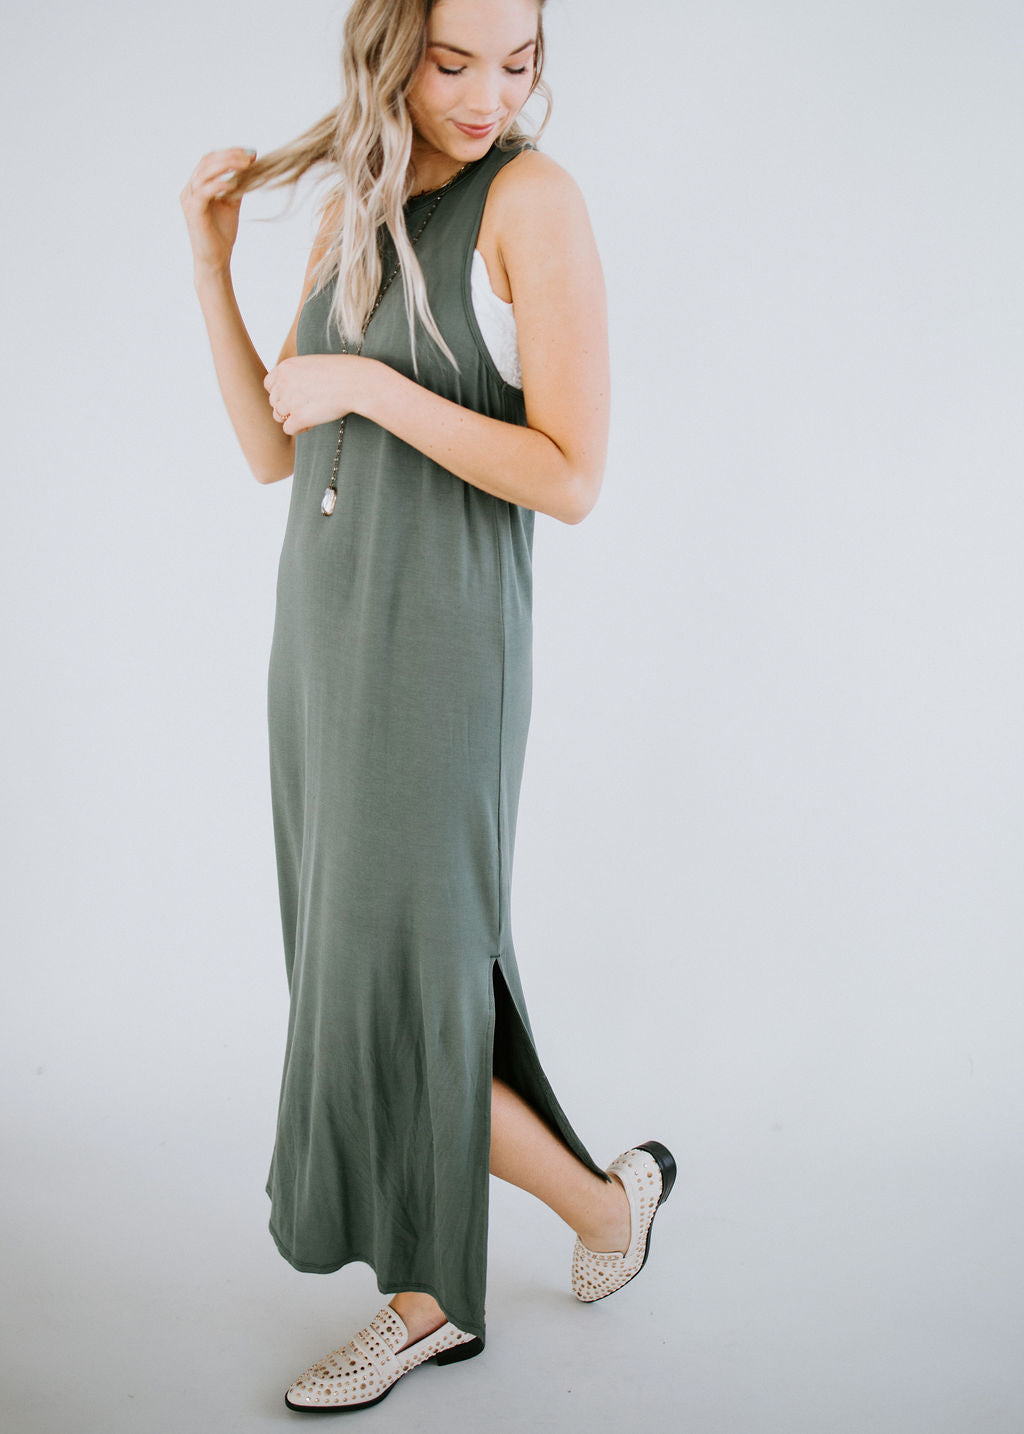 Vacay Vibes Jersey Maxi Dress - ONLINE ONLY